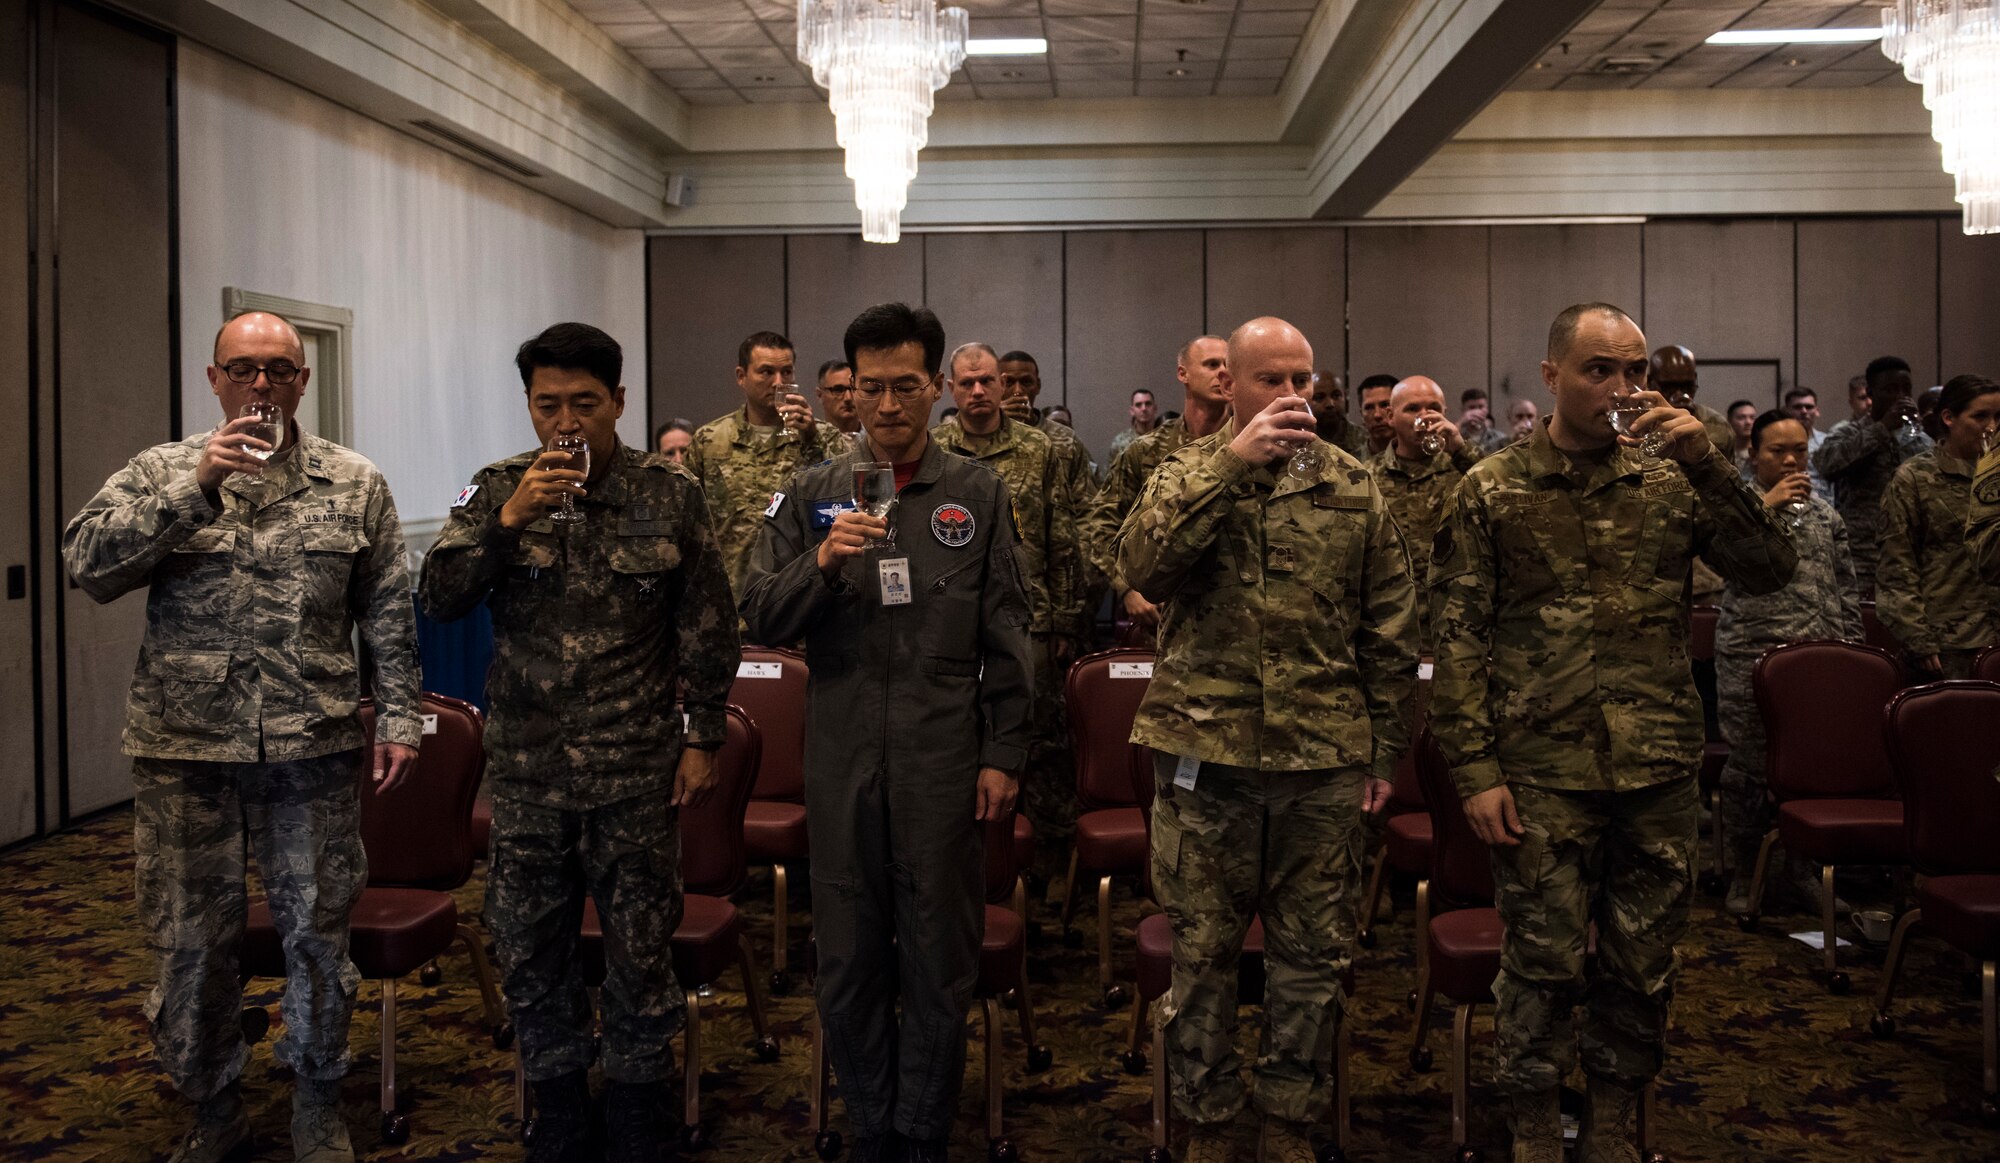 Leaders from the 8th Fighter Wing and Republic of Korea Air Force’s 38th Fighter Group toast during a prisoners of war and missing in action memorial ceremony at Kunsan Air Base, Republic of Korea, Sept. 20, 2019. There are currently more than 81,000 POW/MIAs, and over 70 percent of them are in the Indo-Pacific region. (U.S. Air Force photo by Senior Airman Stefan Alvarez)